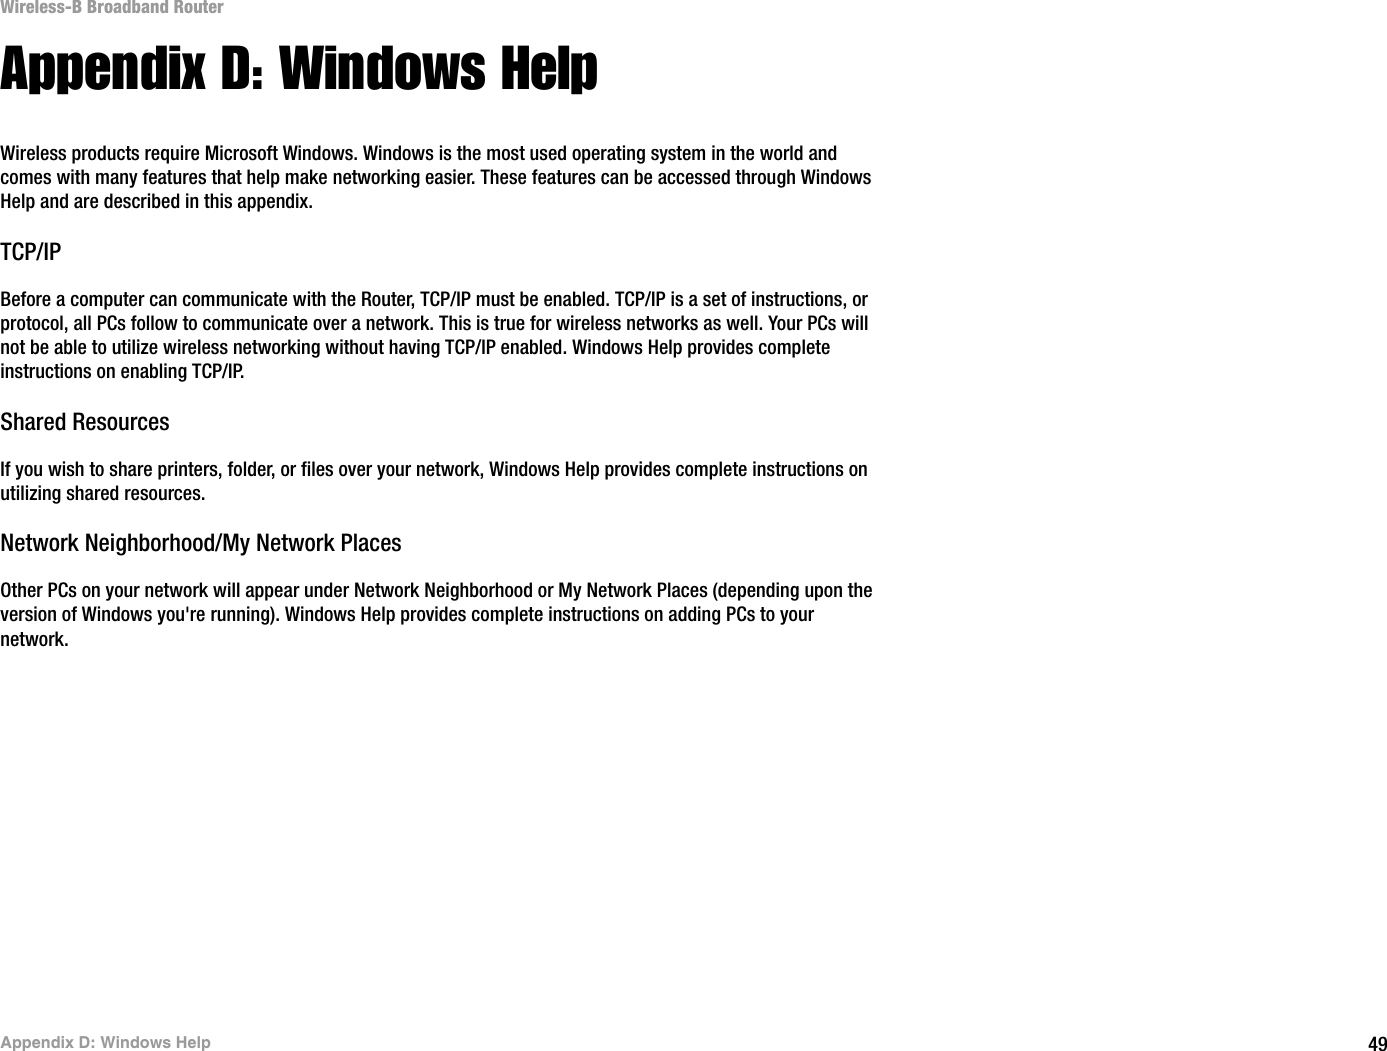 49Appendix D: Windows HelpWireless-B Broadband RouterAppendix D: Windows HelpWireless products require Microsoft Windows. Windows is the most used operating system in the world and comes with many features that help make networking easier. These features can be accessed through Windows Help and are described in this appendix.TCP/IPBefore a computer can communicate with the Router, TCP/IP must be enabled. TCP/IP is a set of instructions, or protocol, all PCs follow to communicate over a network. This is true for wireless networks as well. Your PCs will not be able to utilize wireless networking without having TCP/IP enabled. Windows Help provides complete instructions on enabling TCP/IP.Shared ResourcesIf you wish to share printers, folder, or files over your network, Windows Help provides complete instructions on utilizing shared resources.Network Neighborhood/My Network PlacesOther PCs on your network will appear under Network Neighborhood or My Network Places (depending upon the version of Windows you&apos;re running). Windows Help provides complete instructions on adding PCs to your network.